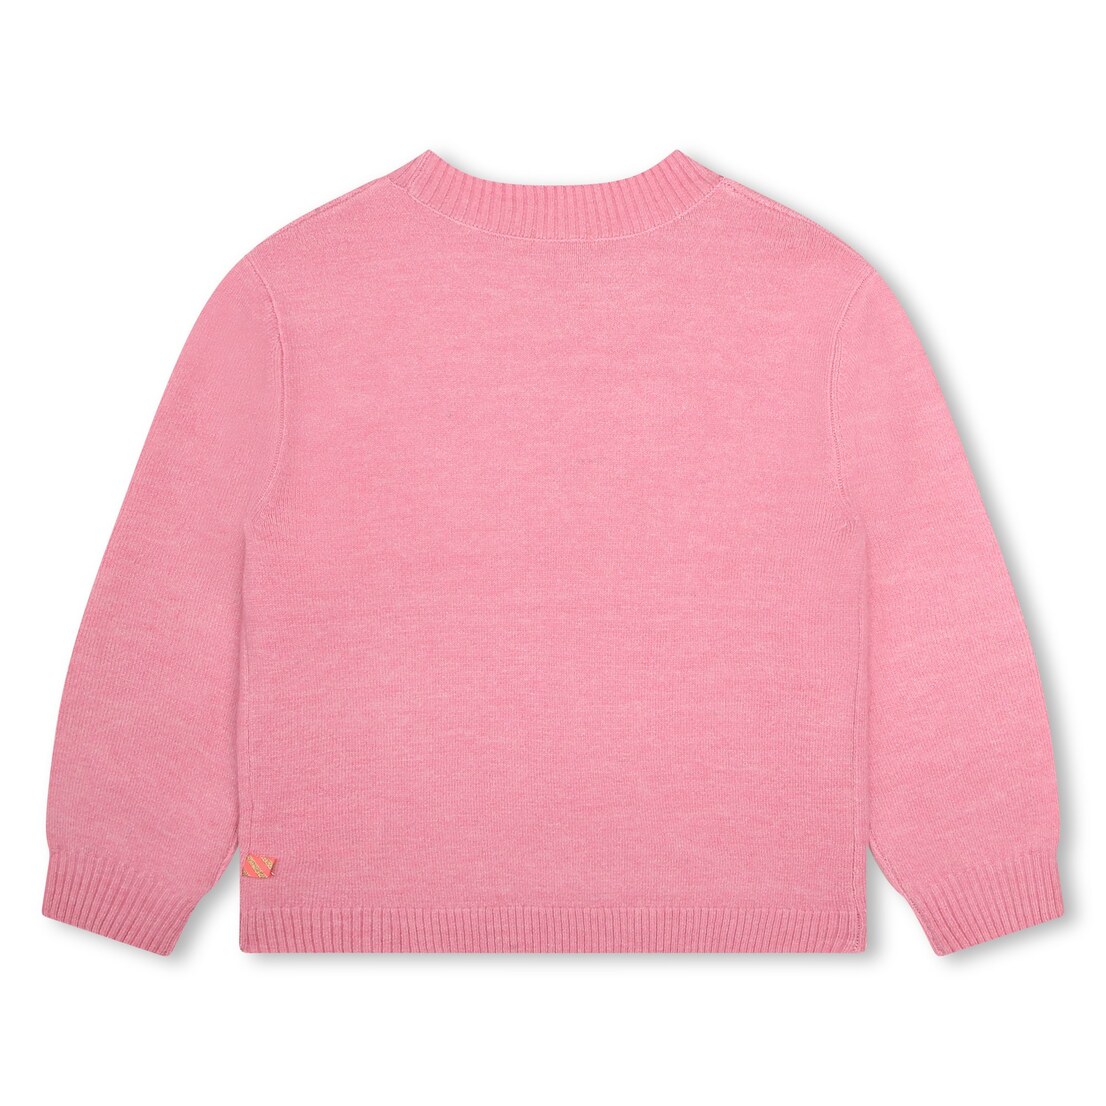 Knitted sweater, sequin patch on the front, label.